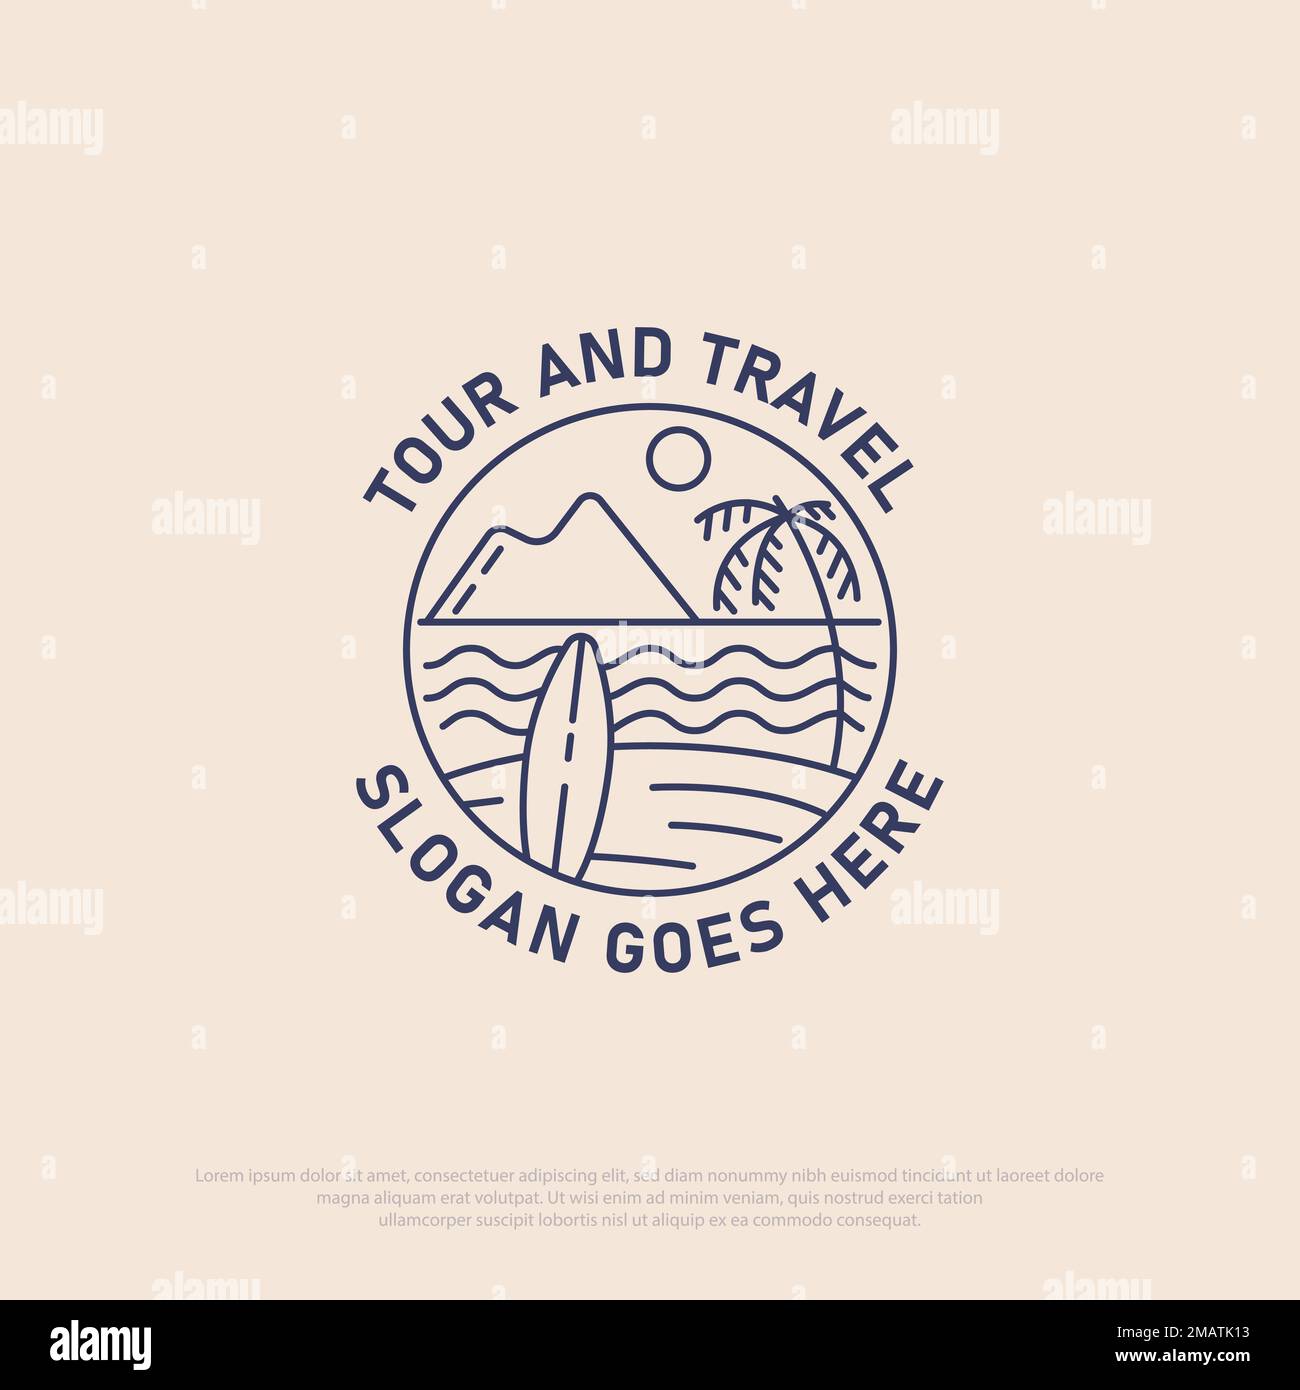 line art Tour and travel logo vector, best for travel agency, holiday, business company icon logo designs idea Stock Vector